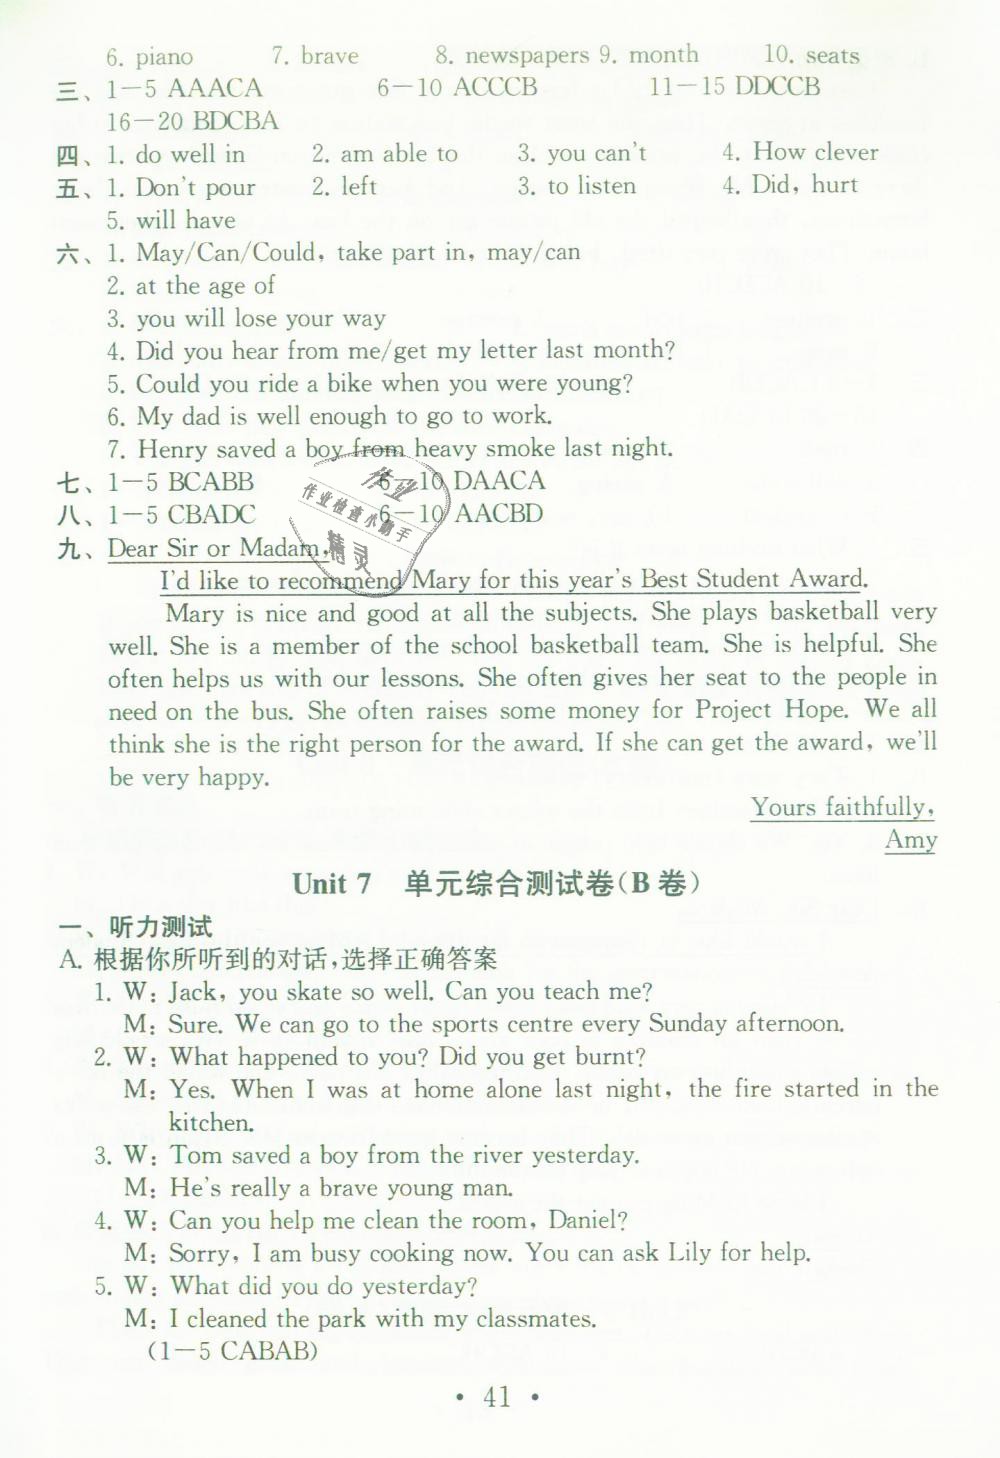 Test for Unit 7 of 7B B卷 - 第40页